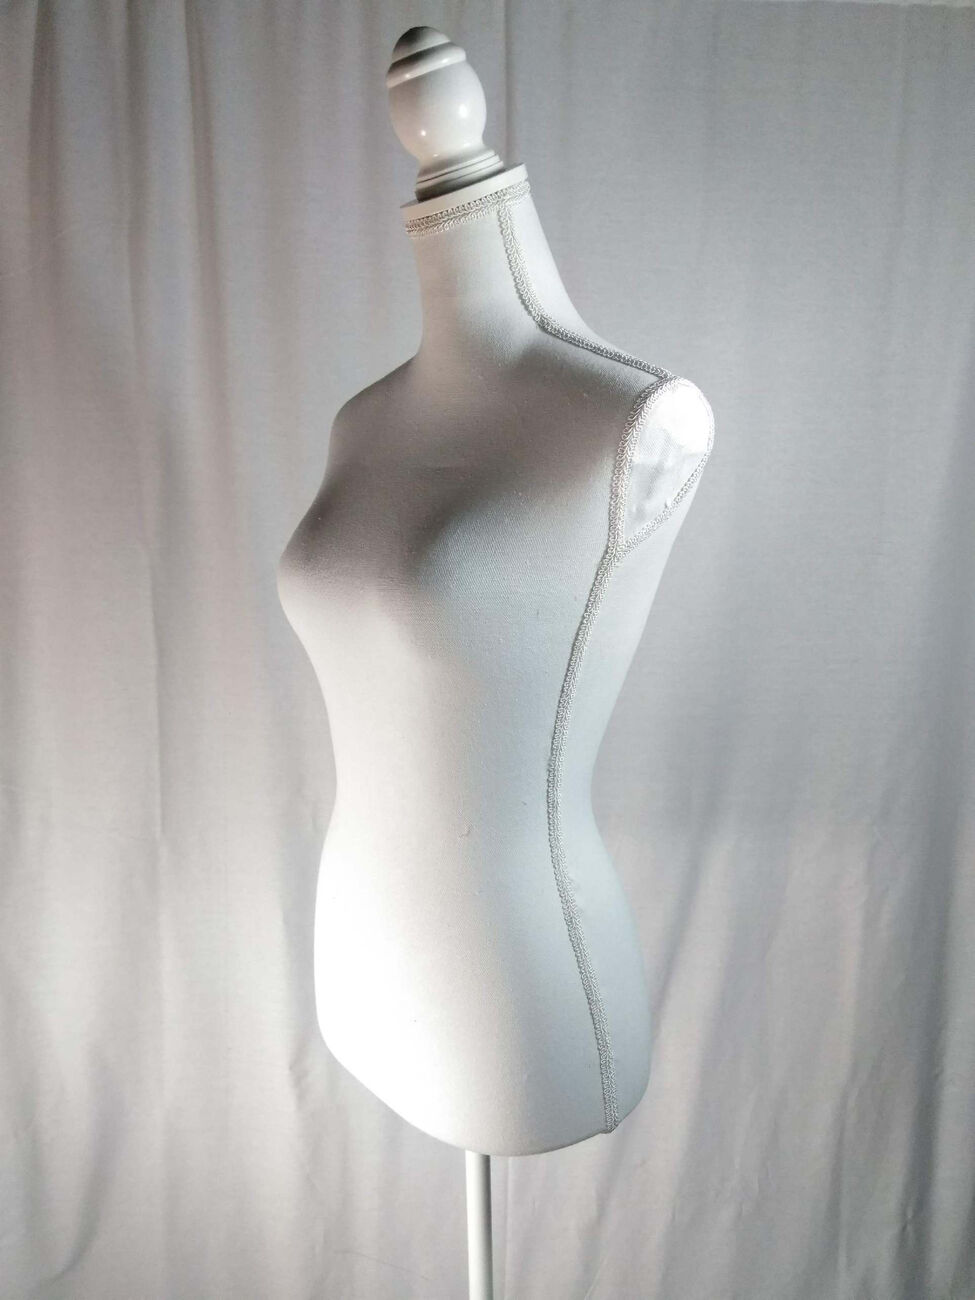 Female Solid White Mannequin by Urban Port